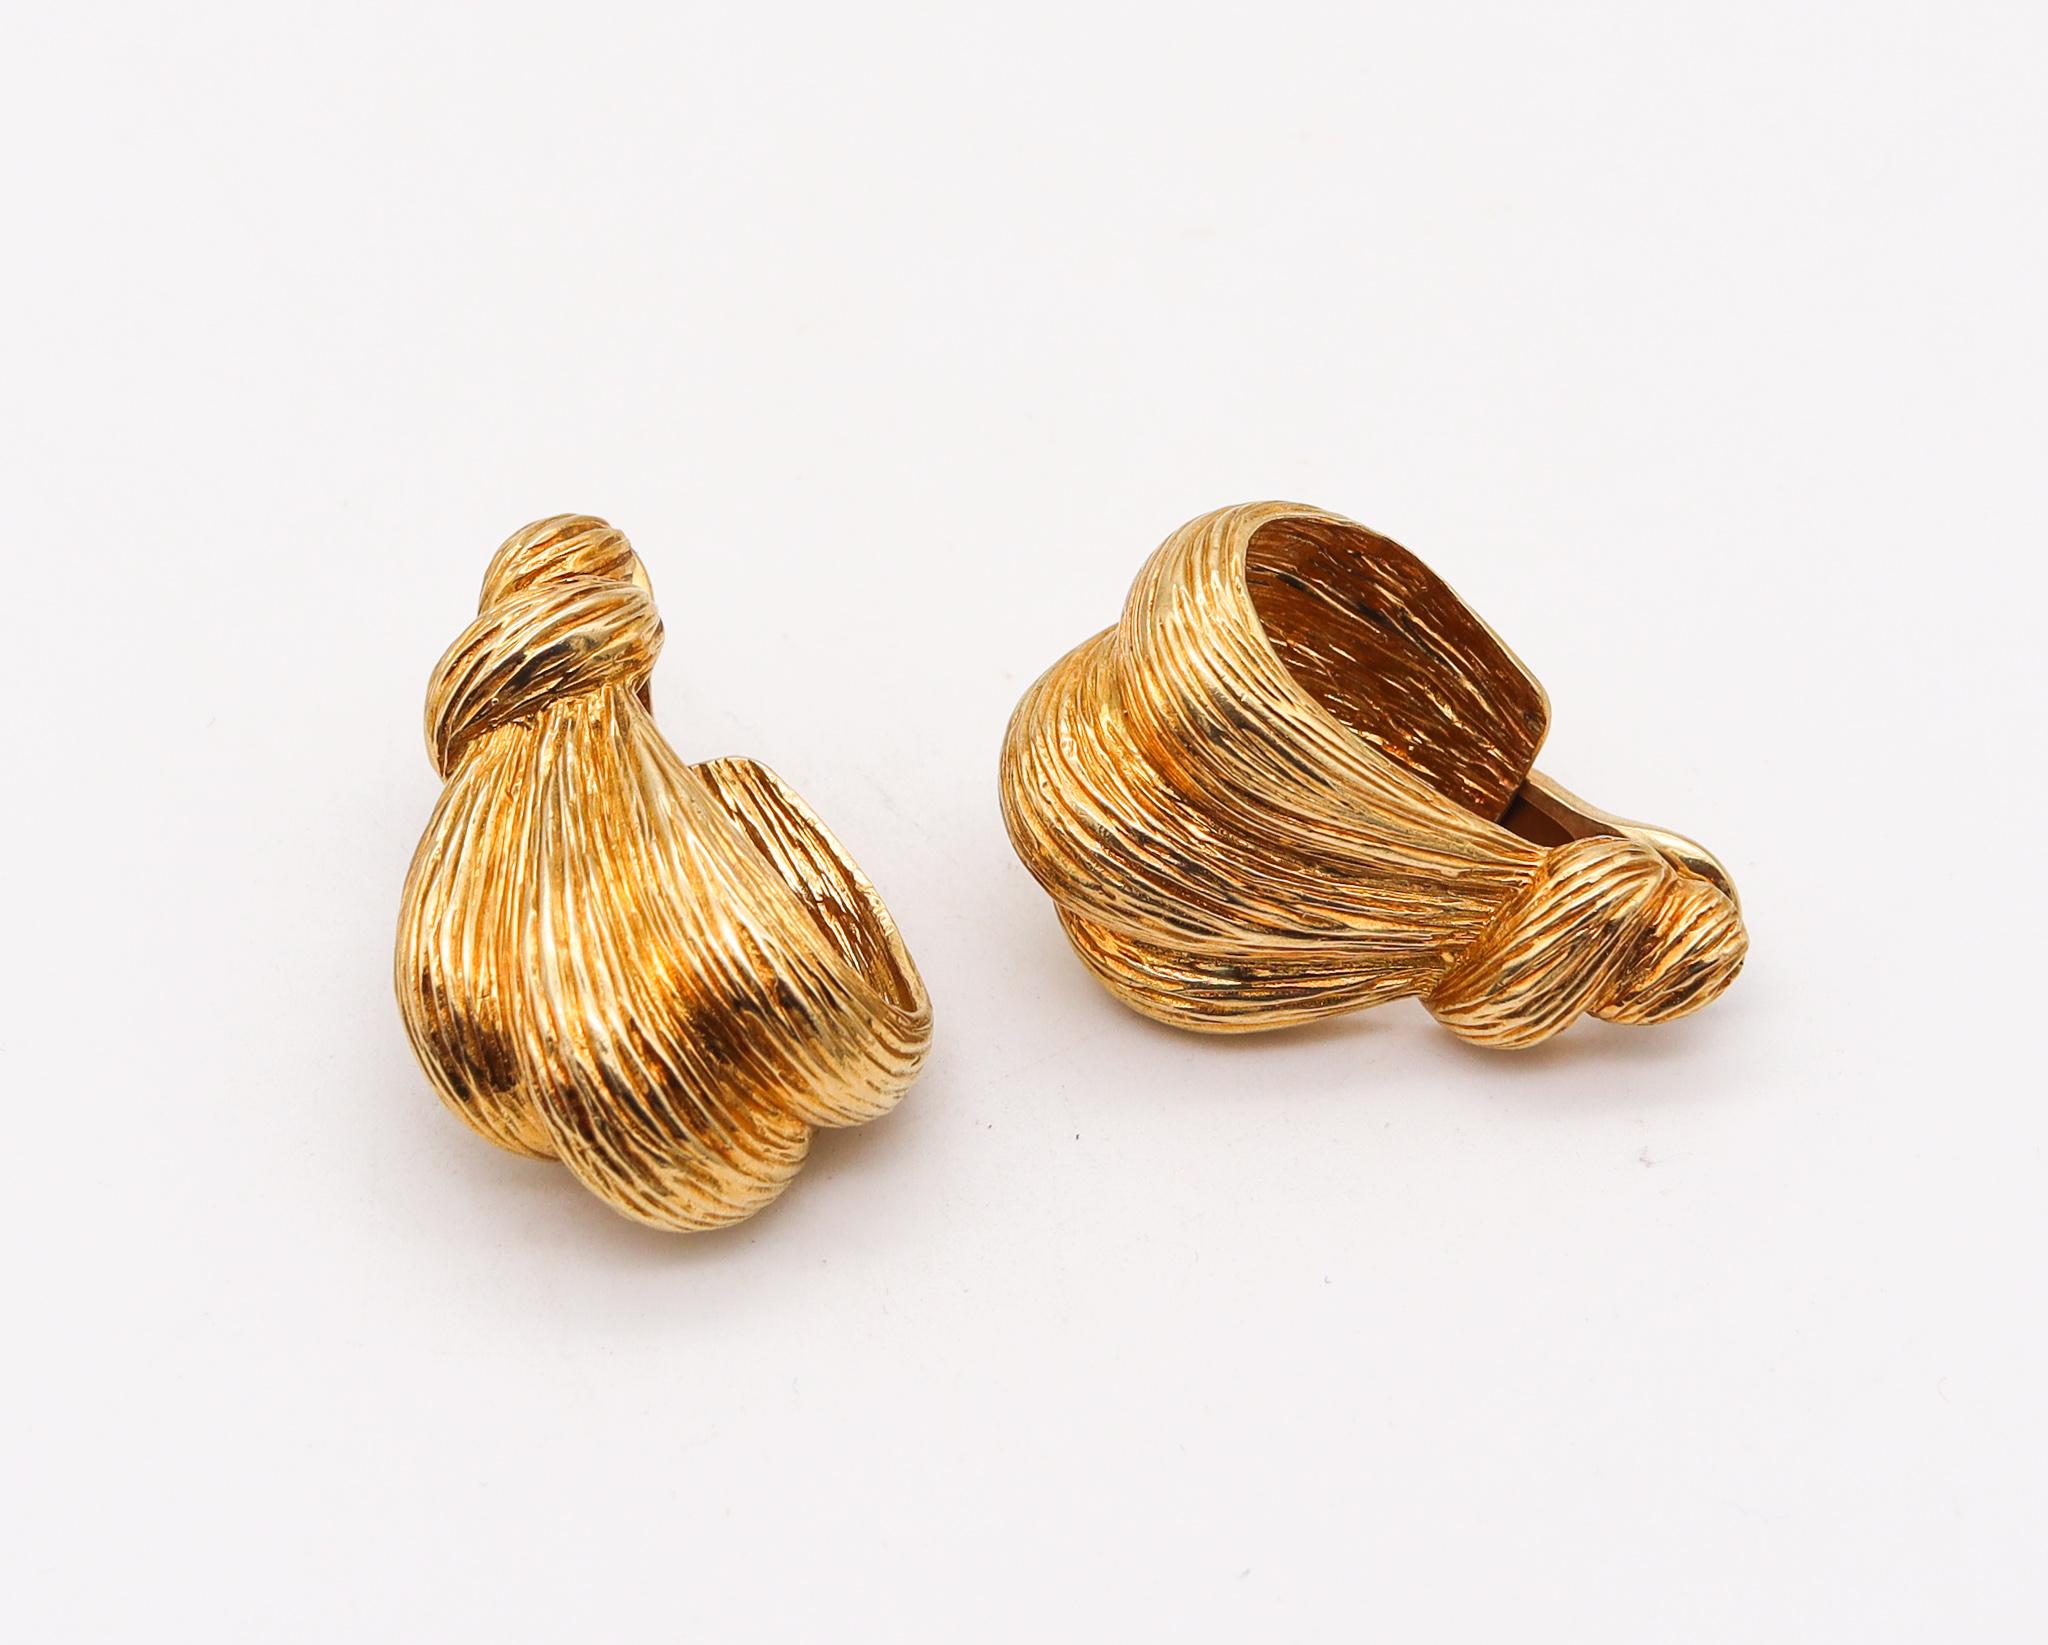 Retro Wander France 1960 Modernist Wrapped Knots Clips Earrings Solid 18Kt Yellow Gold For Sale